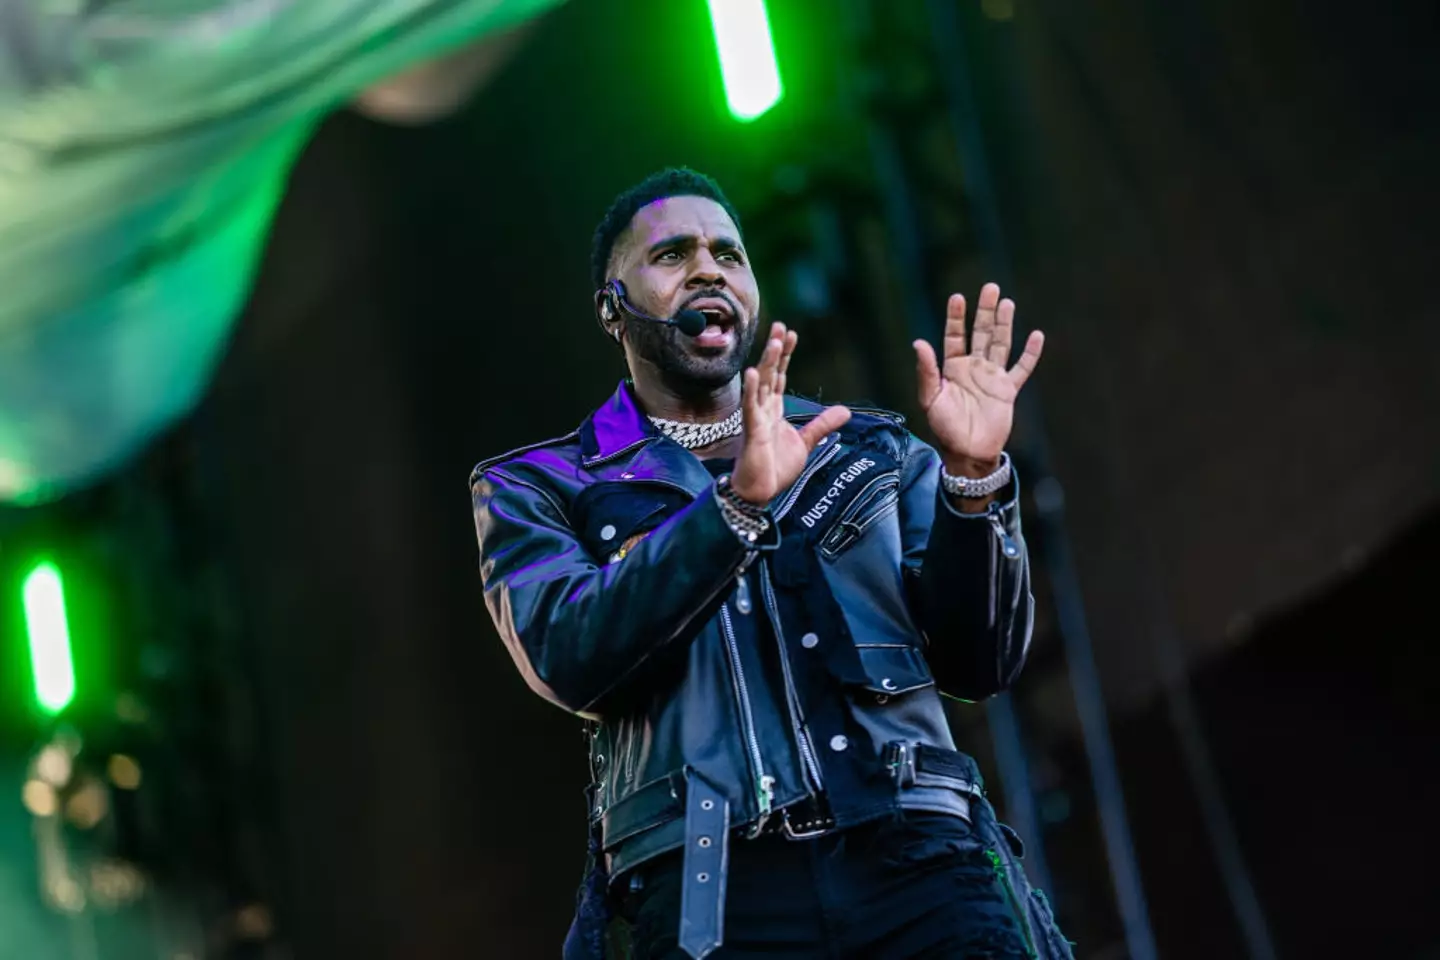 Whatcha say? Derulo is famous for saying his name at the start of his hit songs.